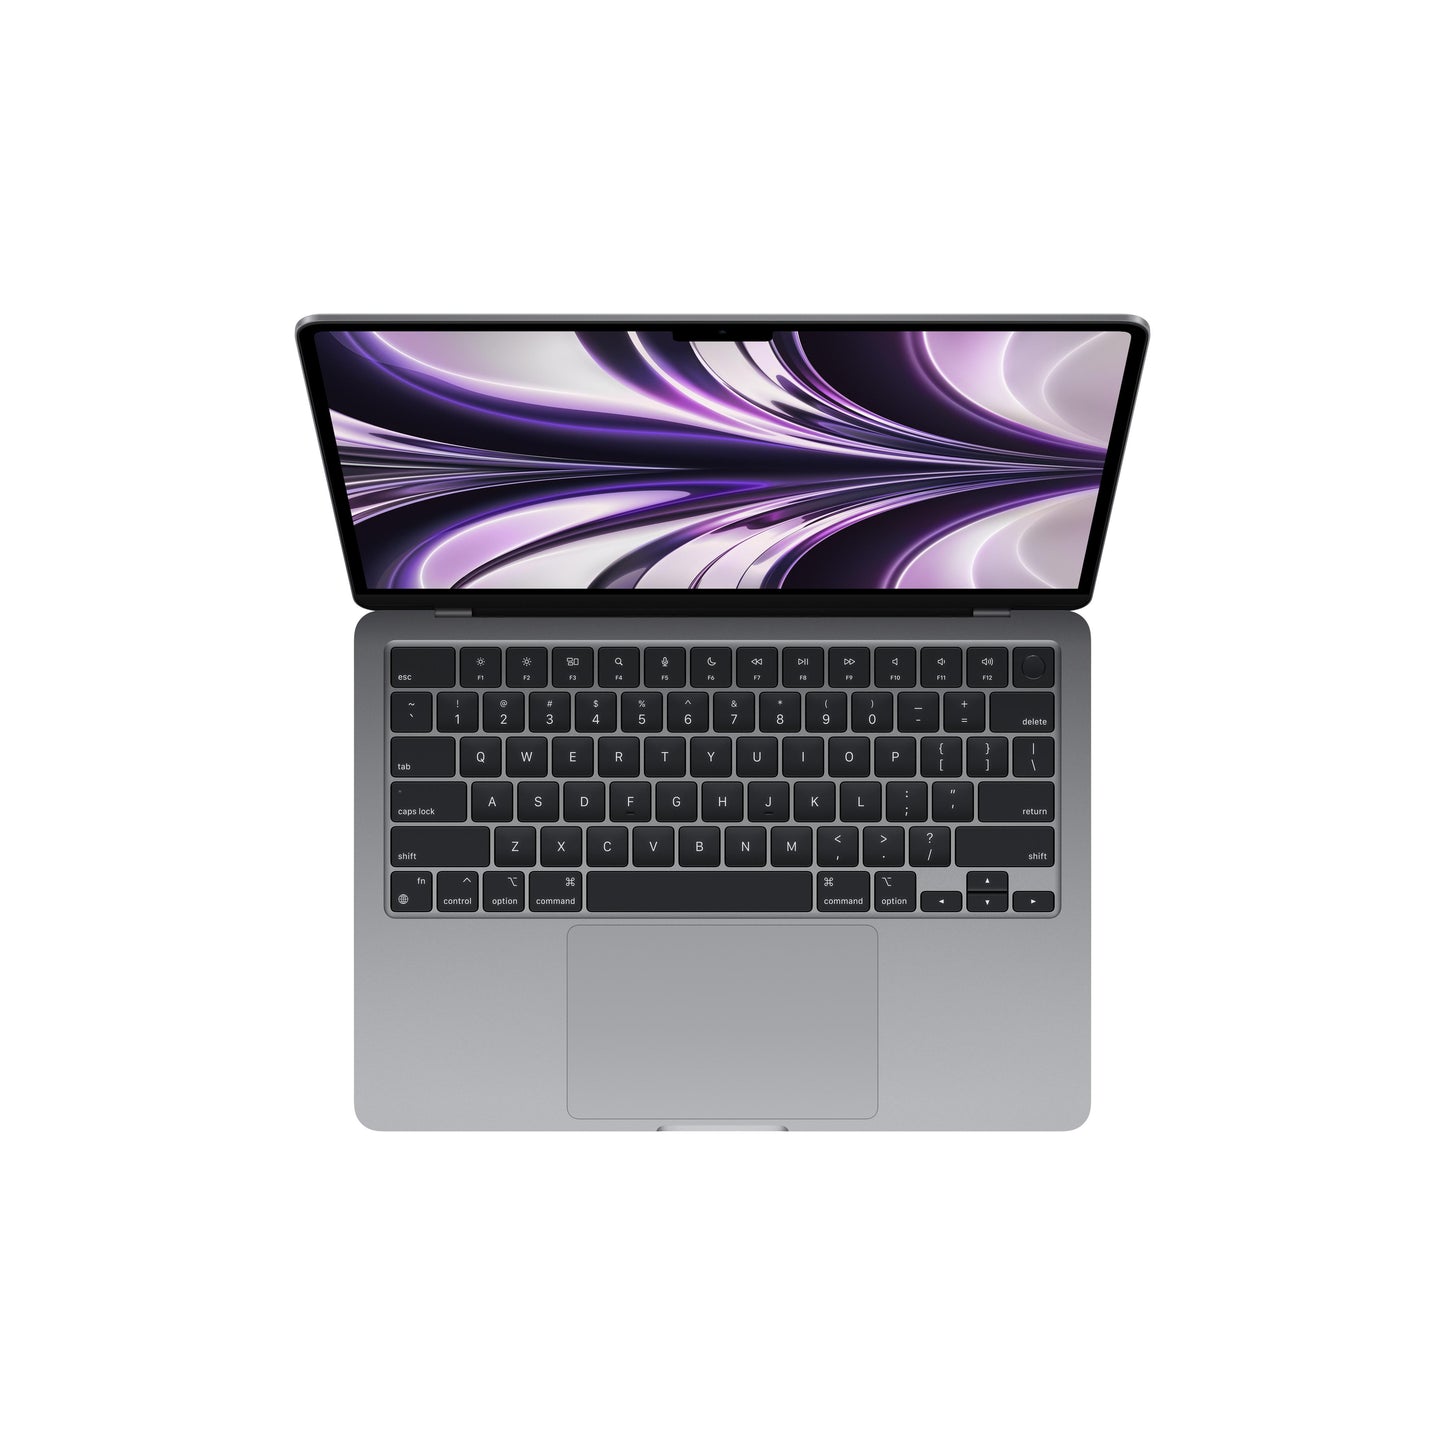 13-inch MacBook Air: Apple M2 chip with 8, core CPU and 8, core GPU, 256GB SSD - Space Grey